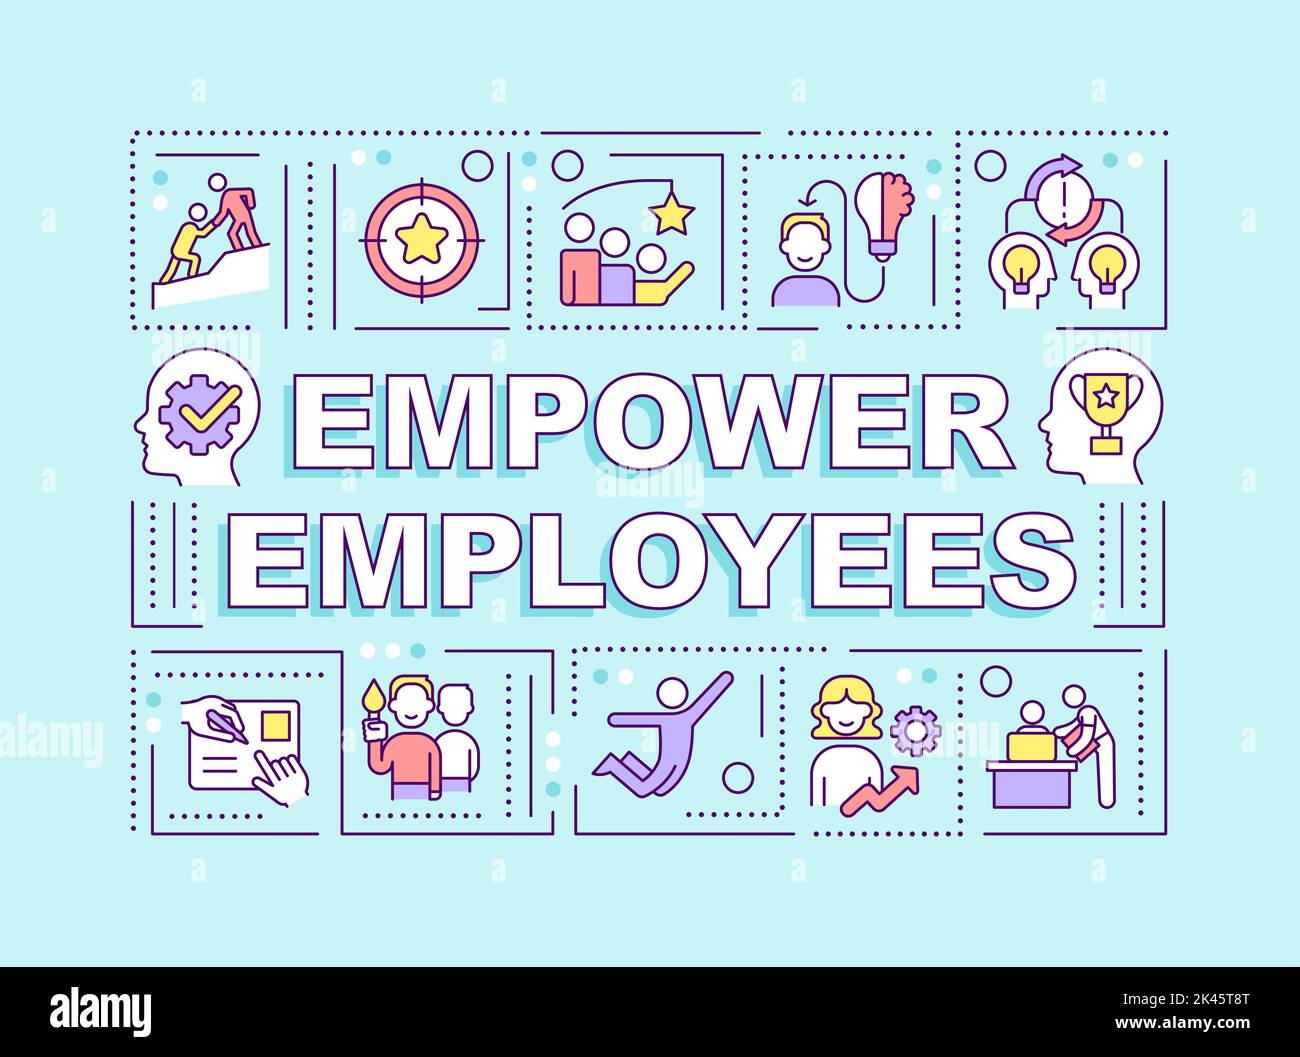 Empower employees word concepts blue banner Stock Vector